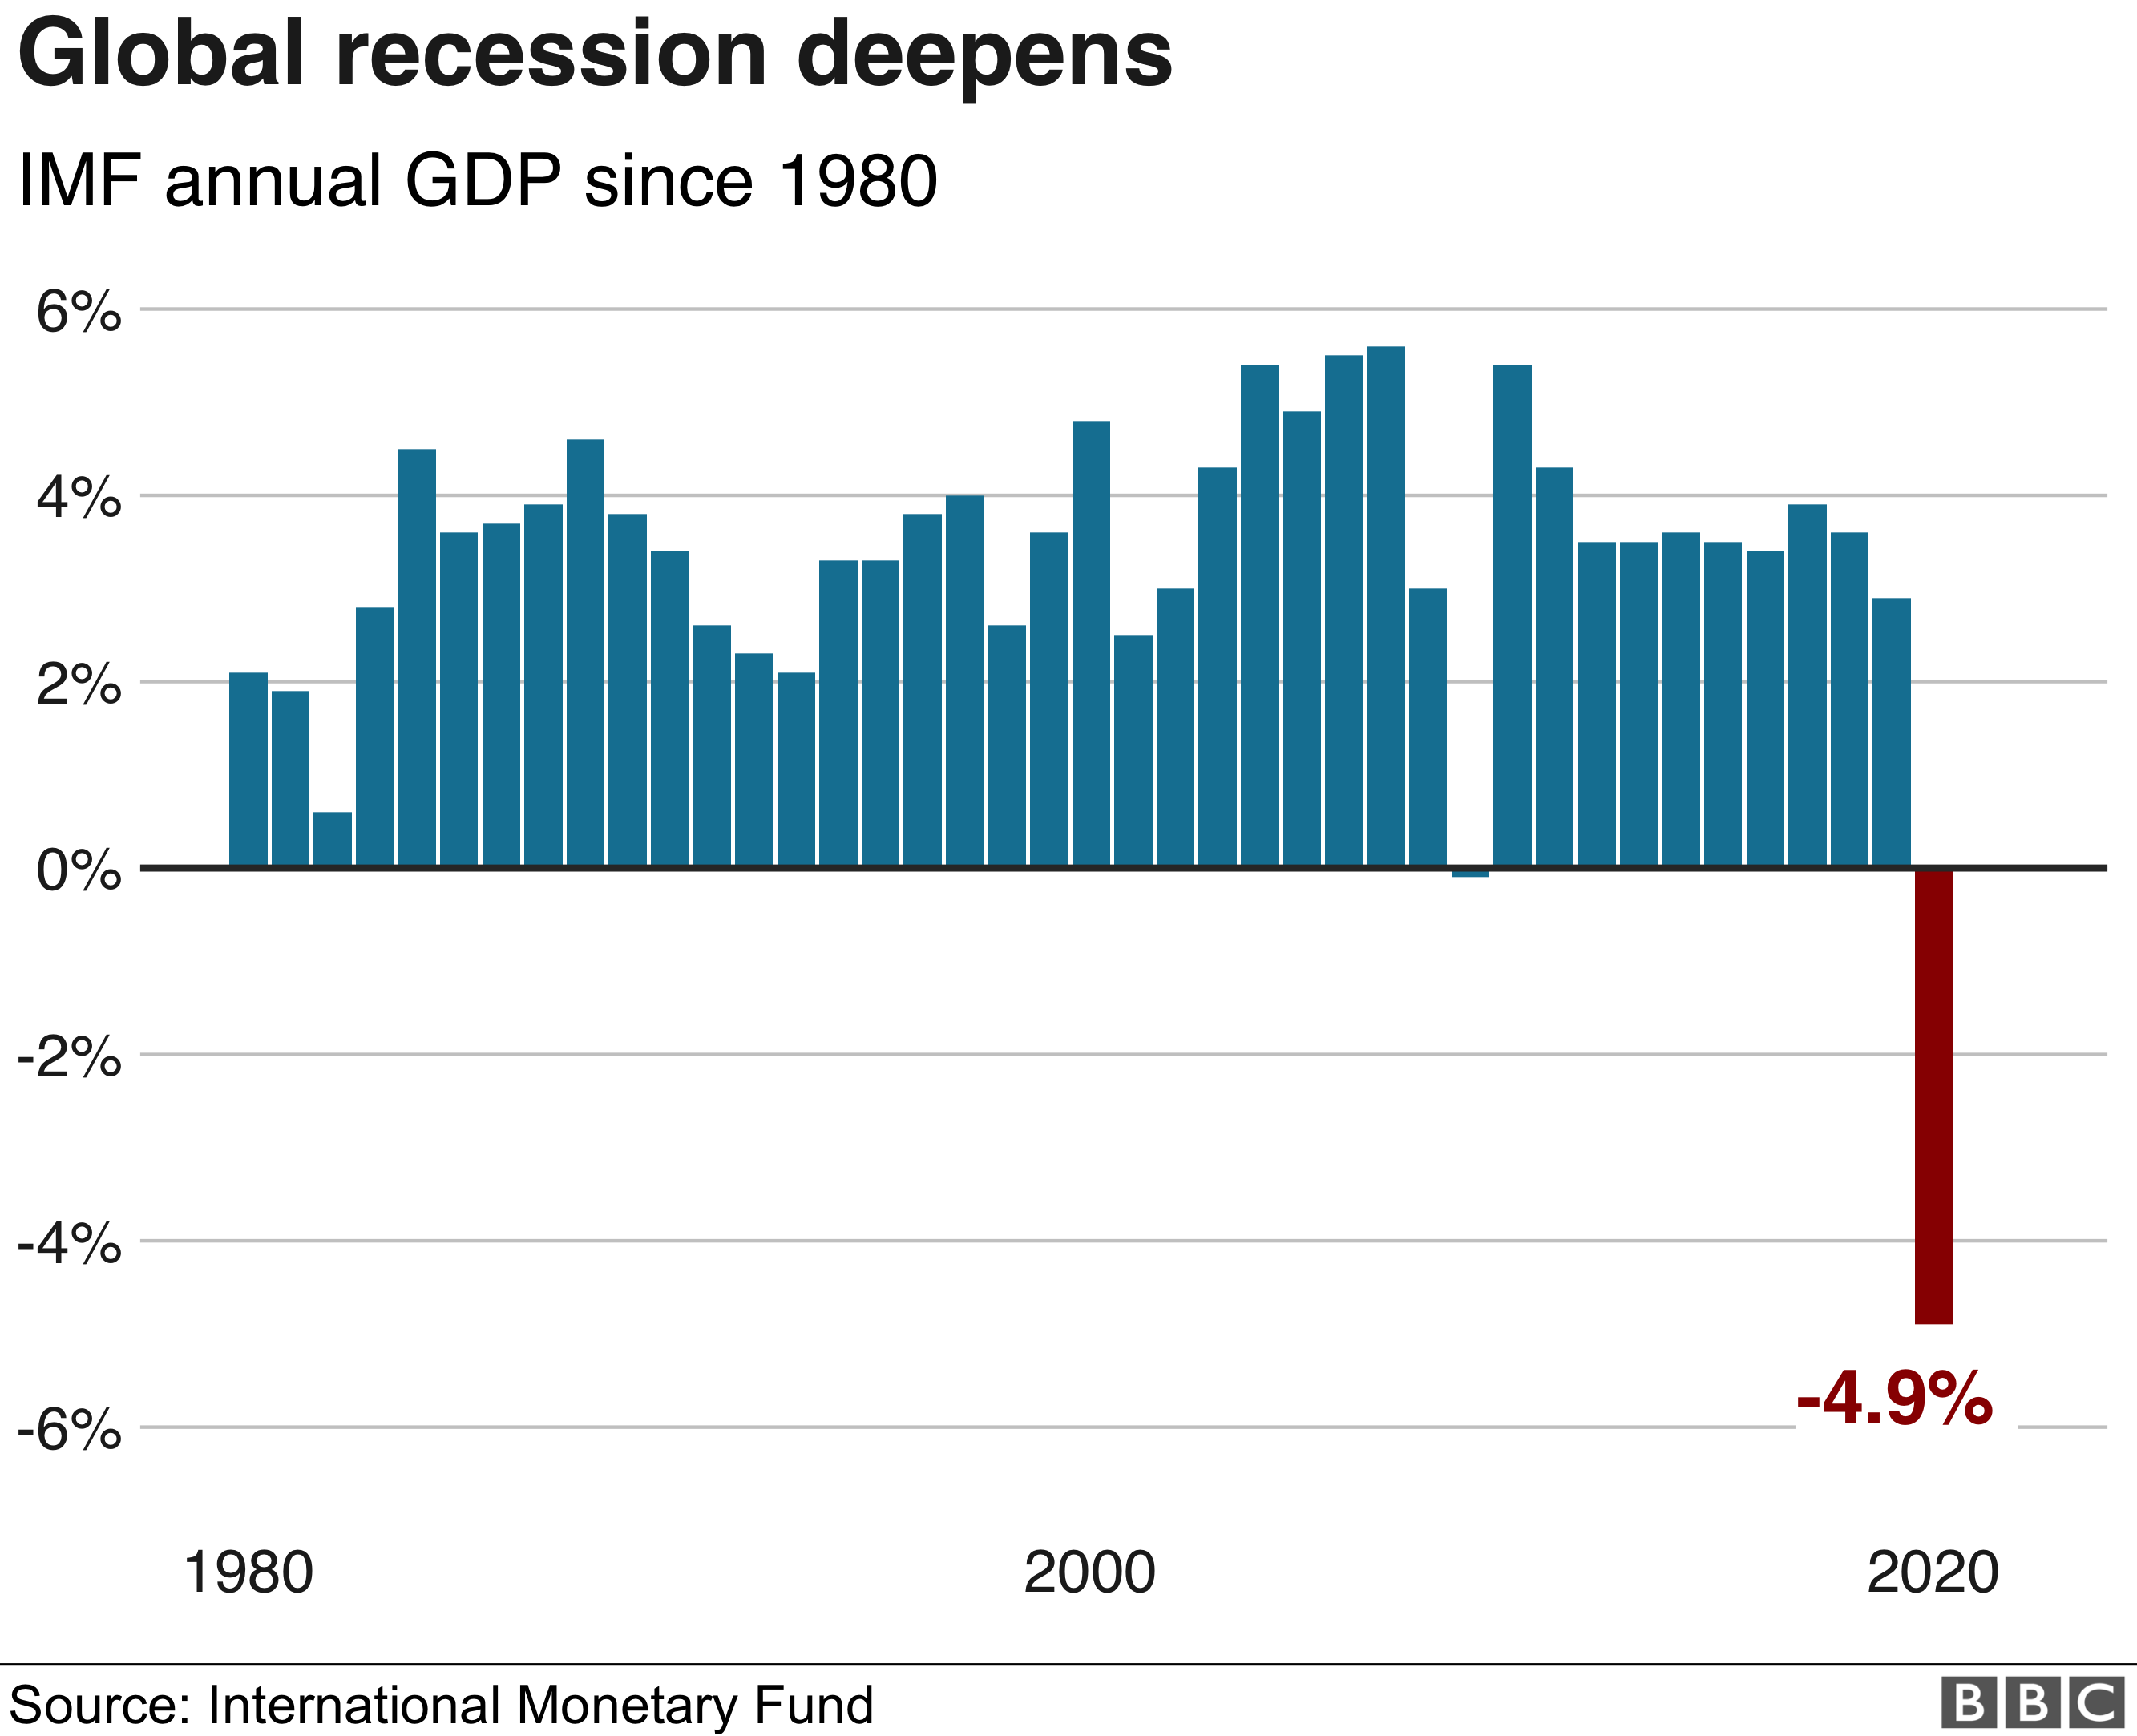 Chart showing the deepening of the global recession